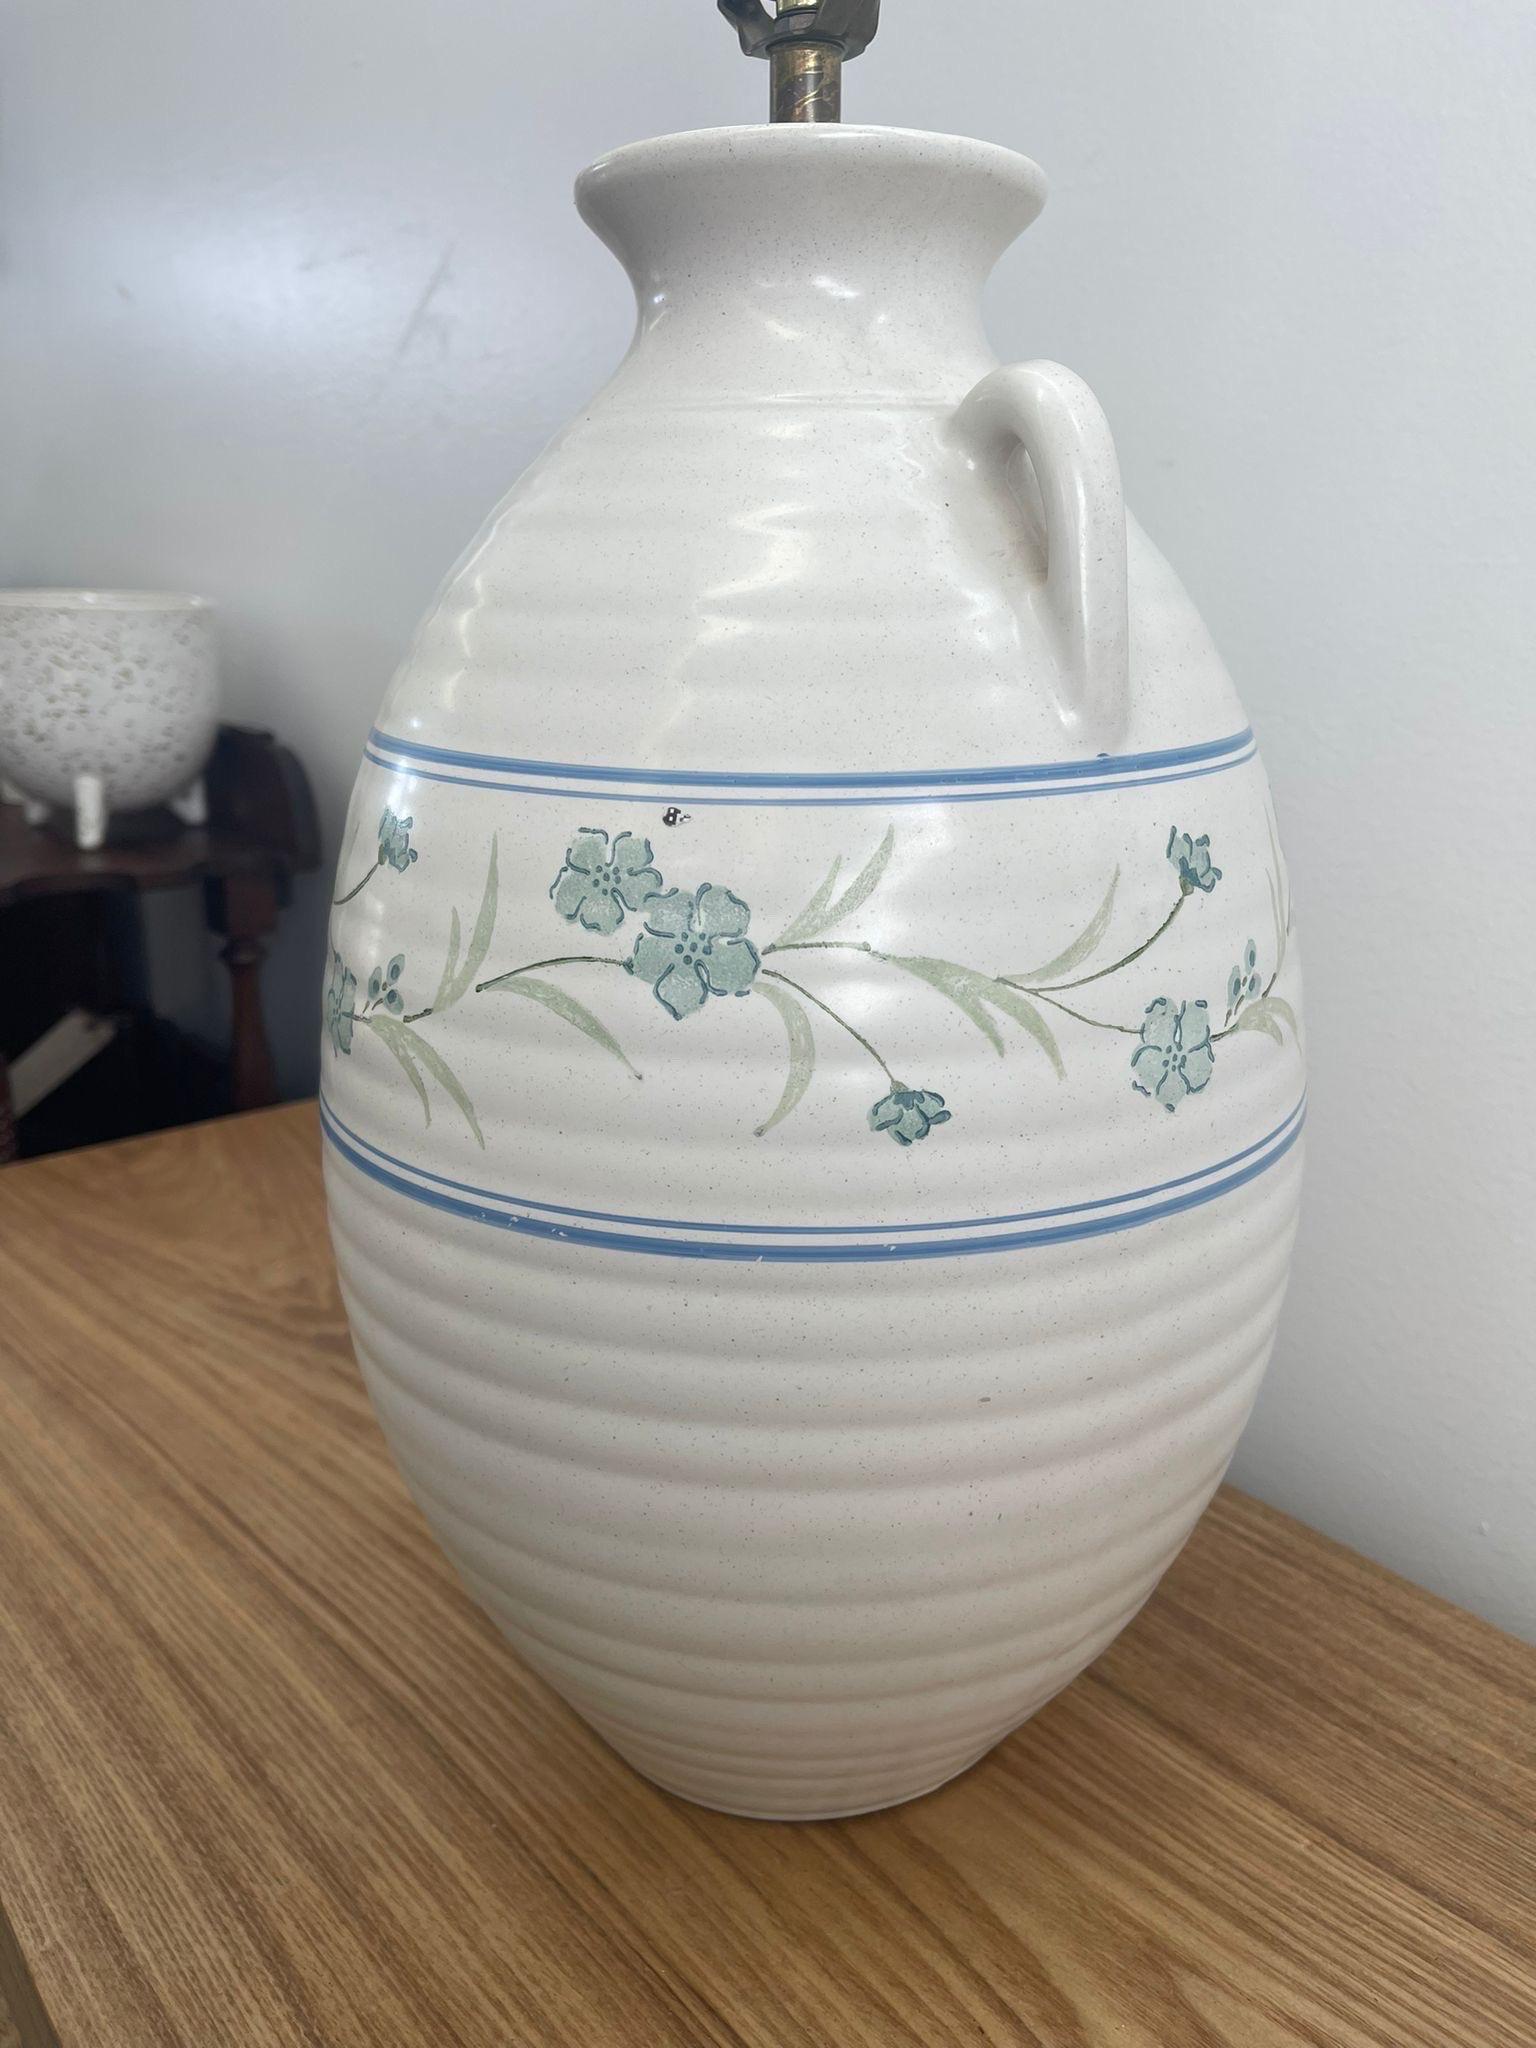 Late 20th Century Vintage Lamp With Ceramic Vase Base and Floral Motif. For Sale